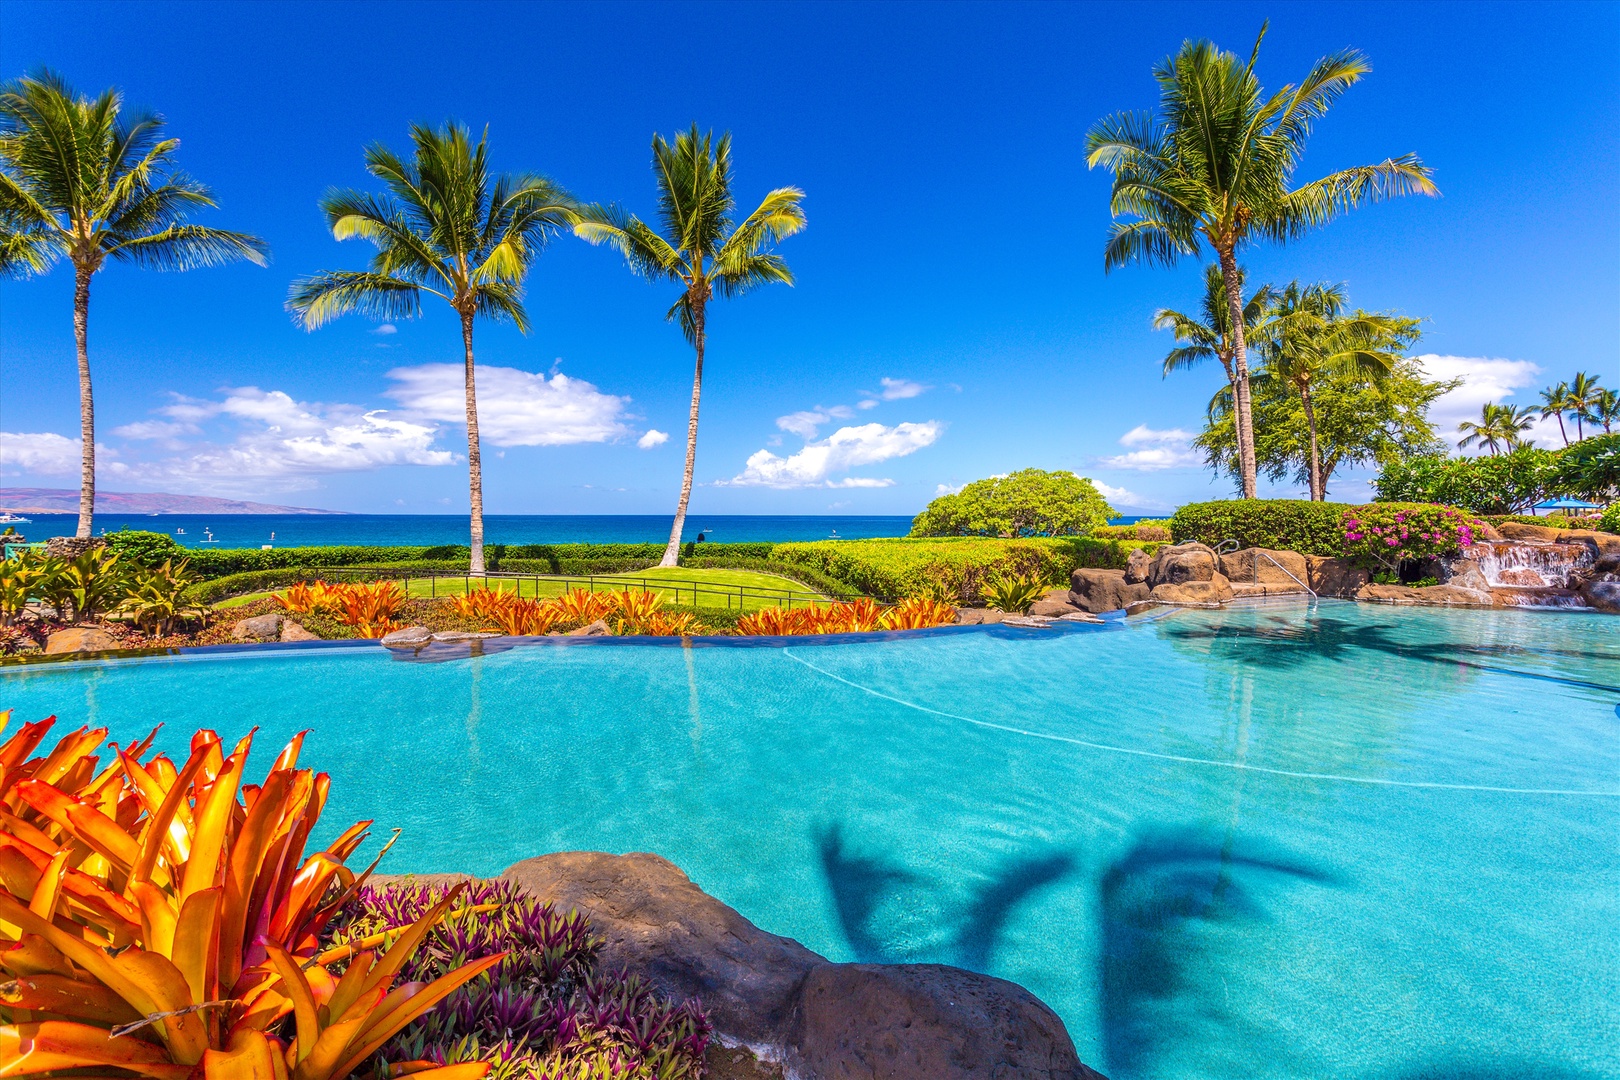 Wailea Vacation Rentals, Blue Ocean Suite H401 at Wailea Beach Villas* - Relax and Cool Off at the Oceanside Adult Only Pool and Jacuzzi Hot Tub